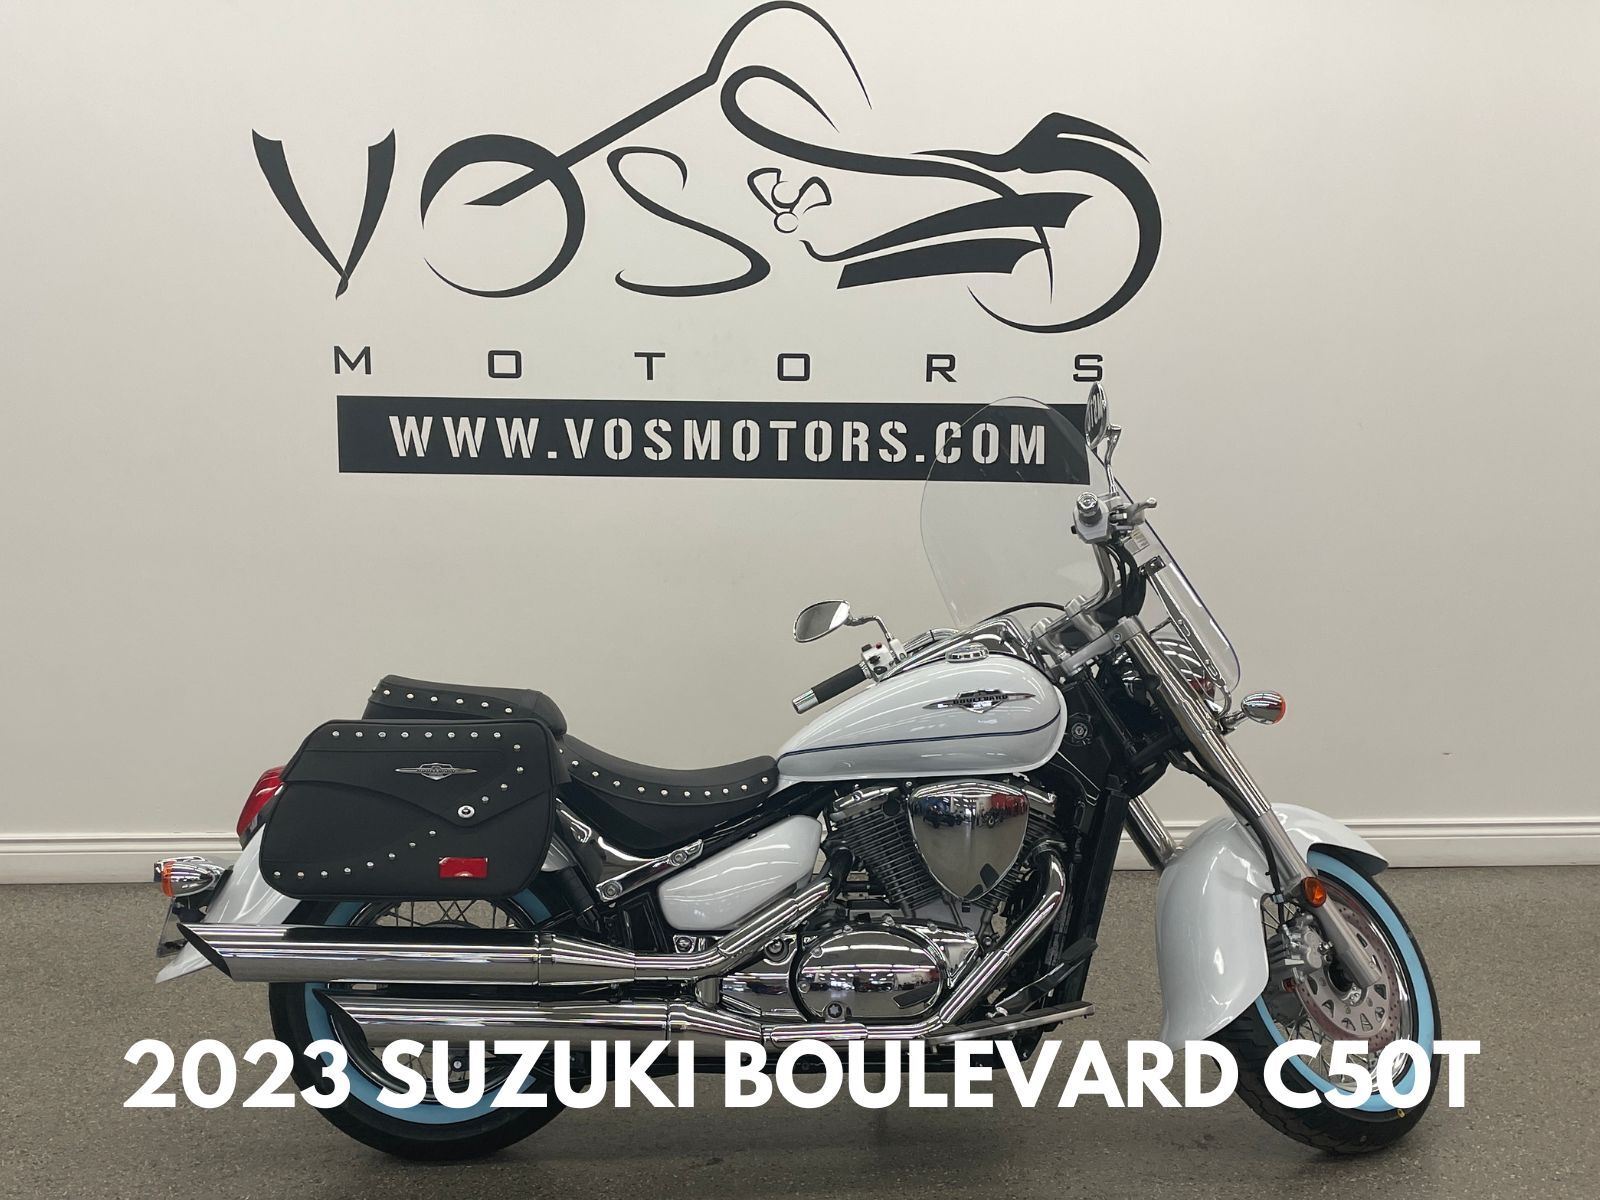 2023 Suzuki Vl800tm3 Boulevard c50t - V5783NP - -No Payments for 1 Year